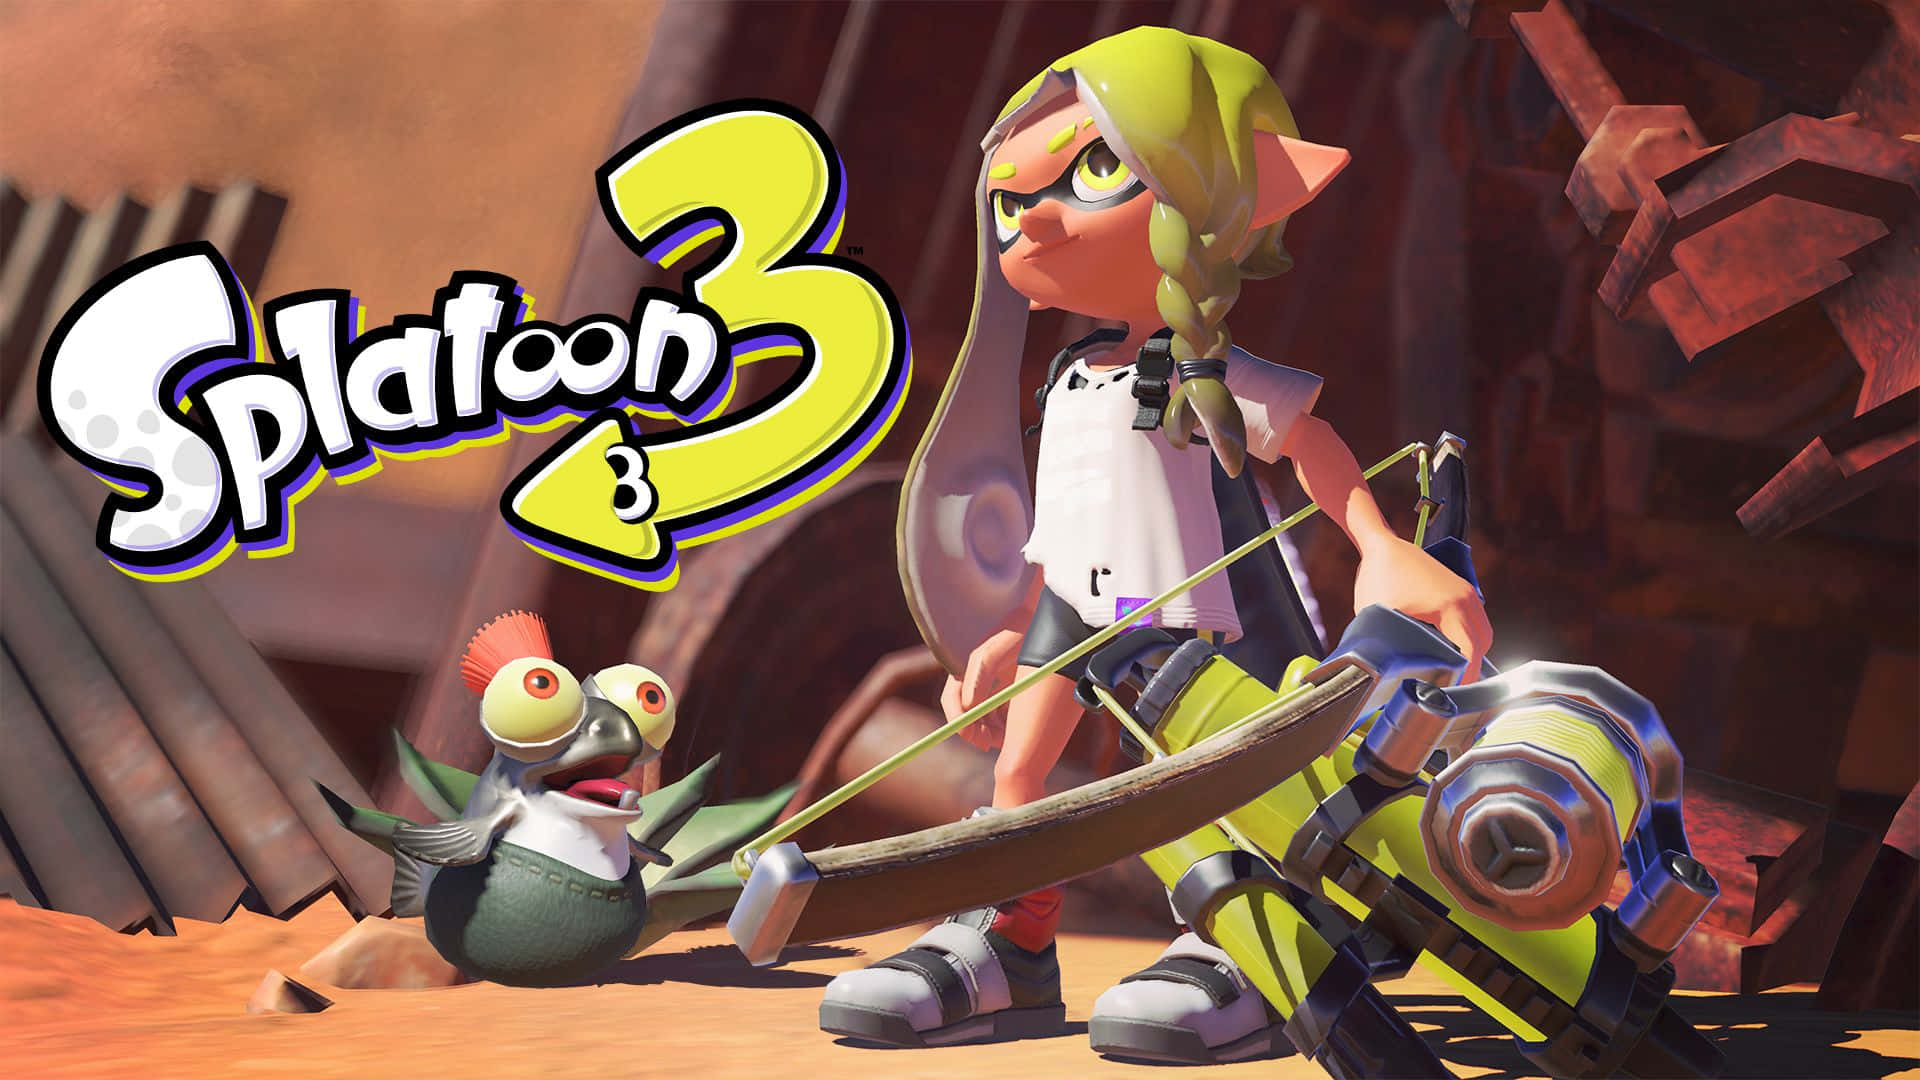 Dive Into an Ink-filled Adventure with Splatoon!